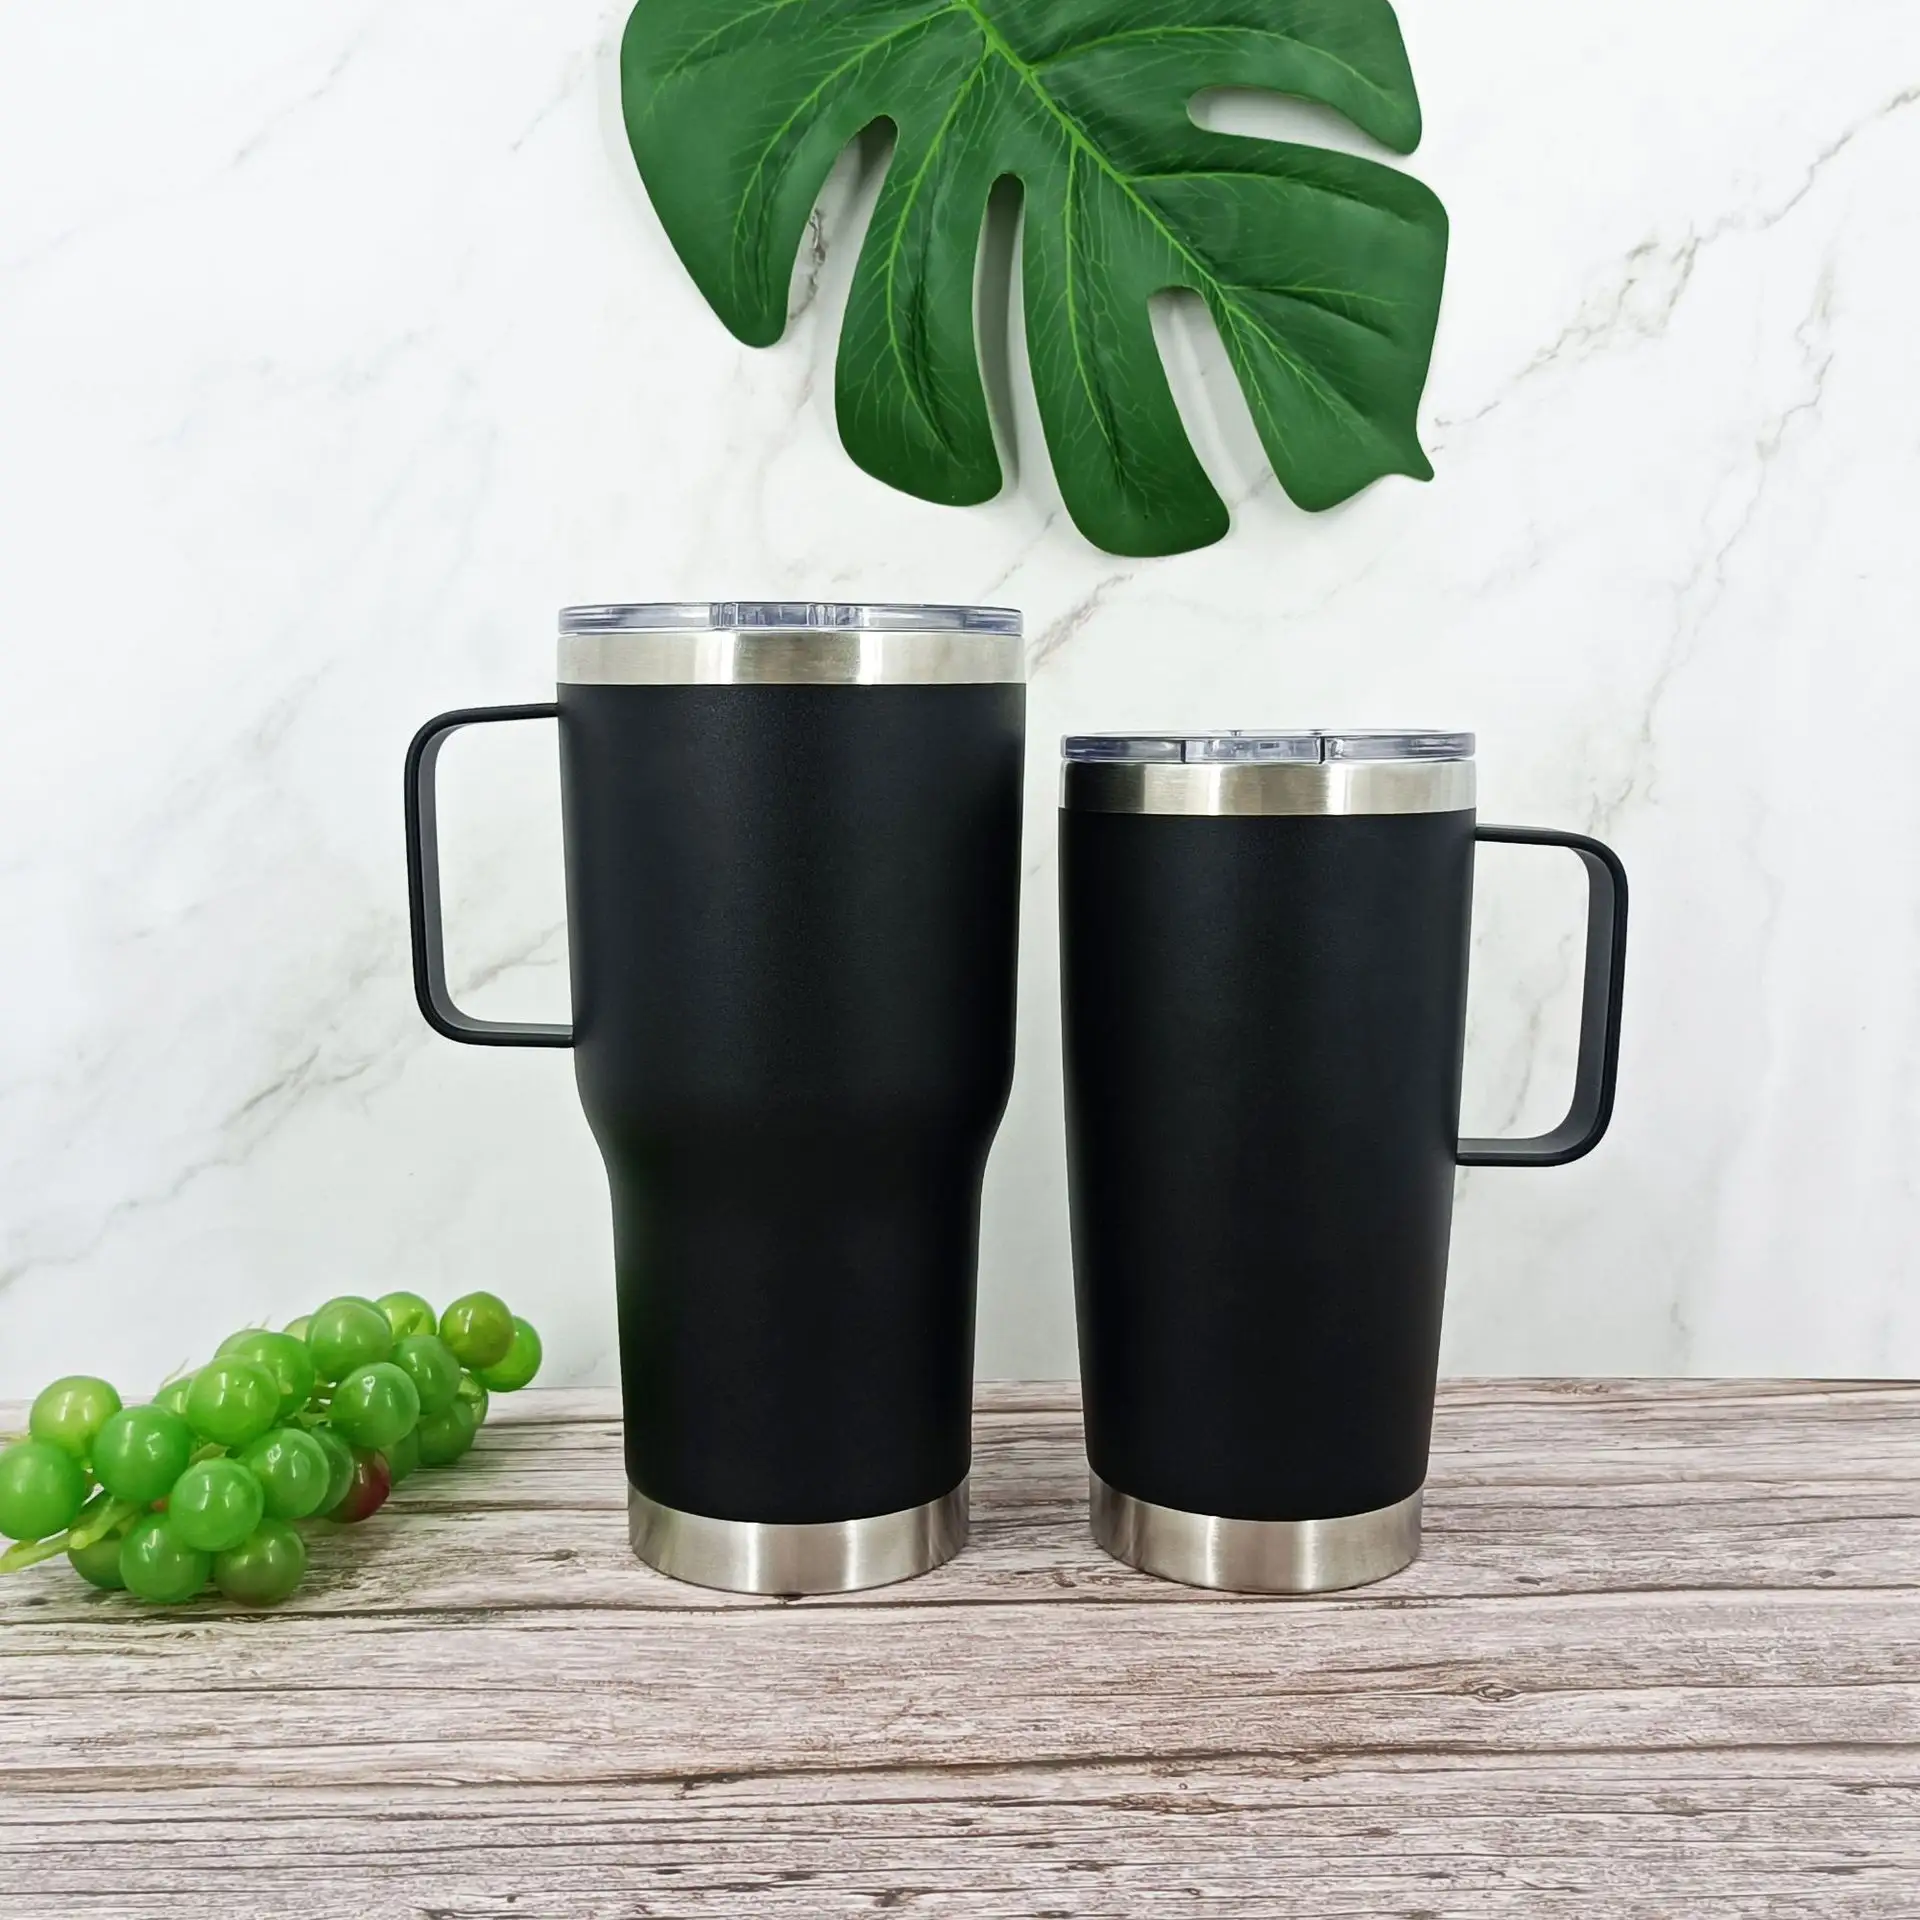 Vacuum Insulated Double Wall Stainless Steel Outdoor Camping Coffee Tea Mug Gradient Handle Tumbler Cups With Silicone Pad